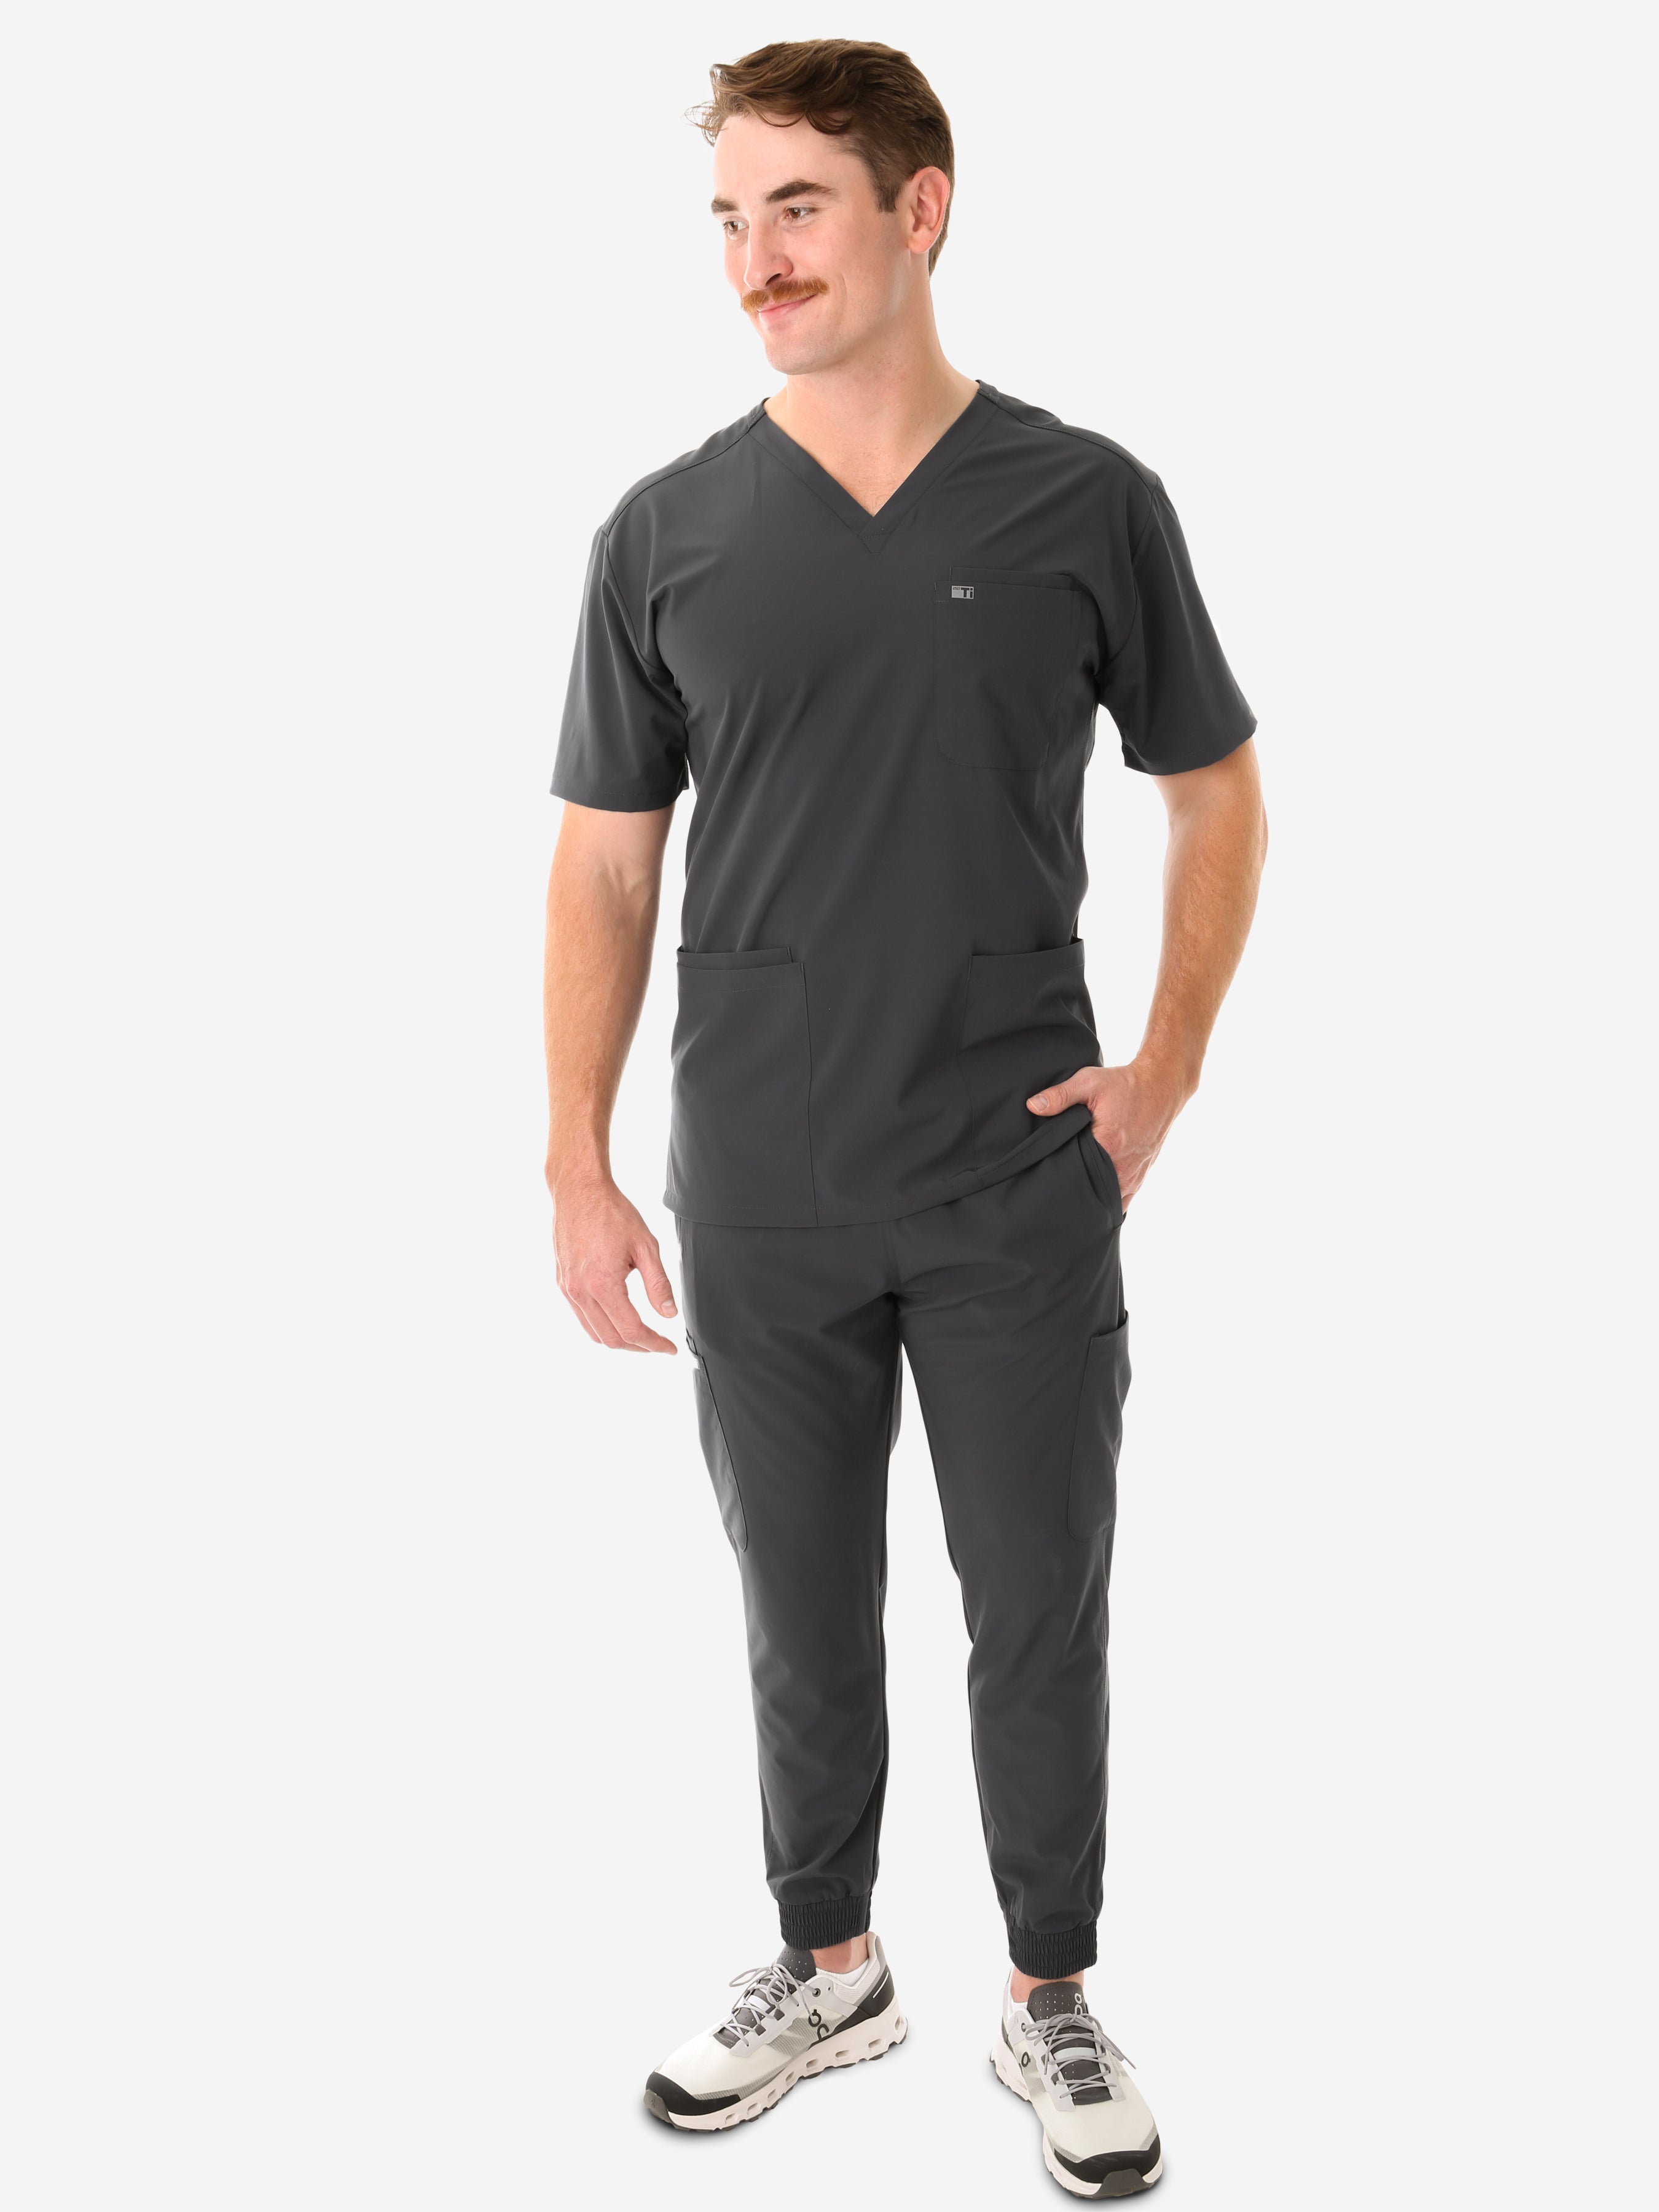 Men's Charocal Gray Five-Pocket Scrub Top Full Body Front View with Joggers